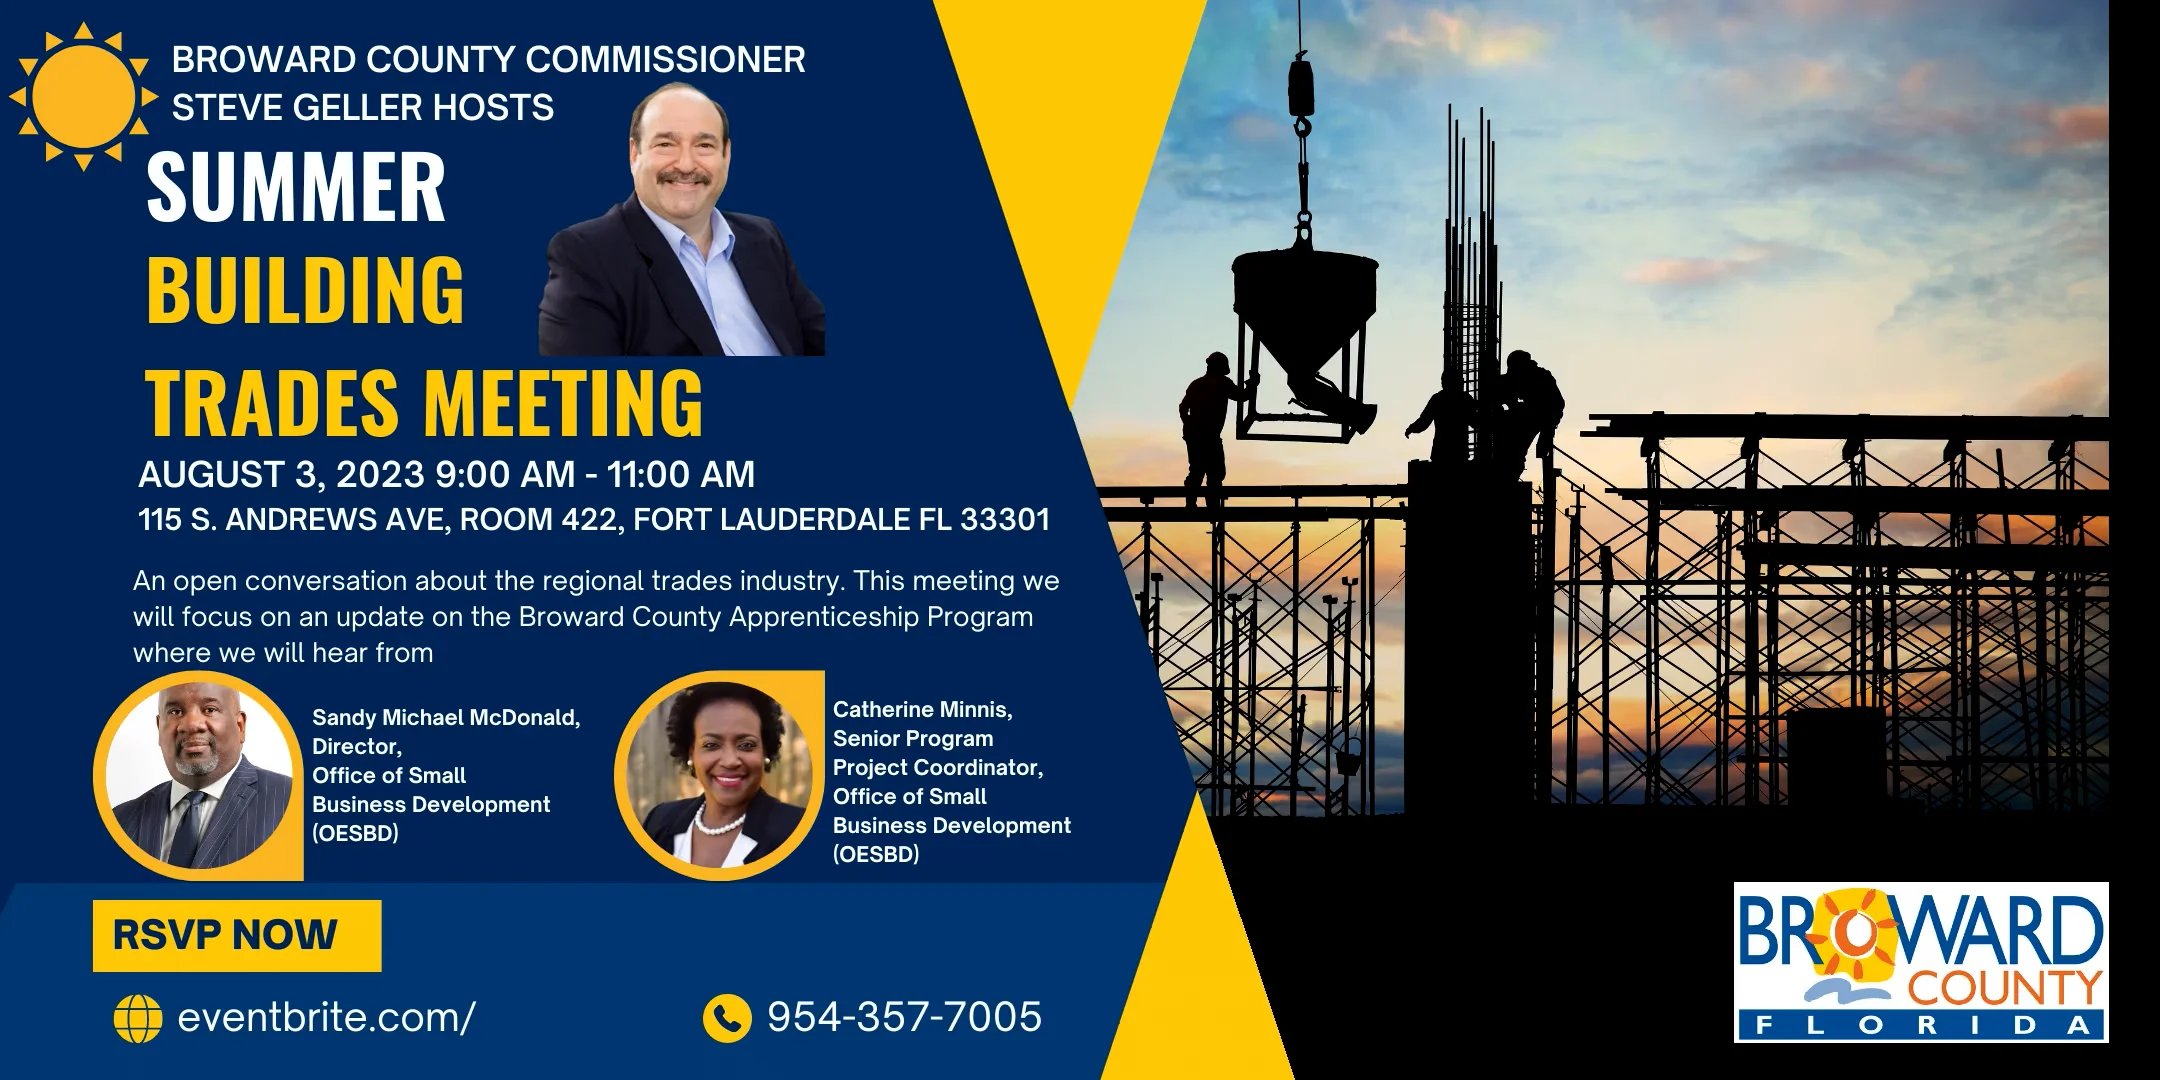 Broward County Summer Building Trades Meeting - August 3, 2023  